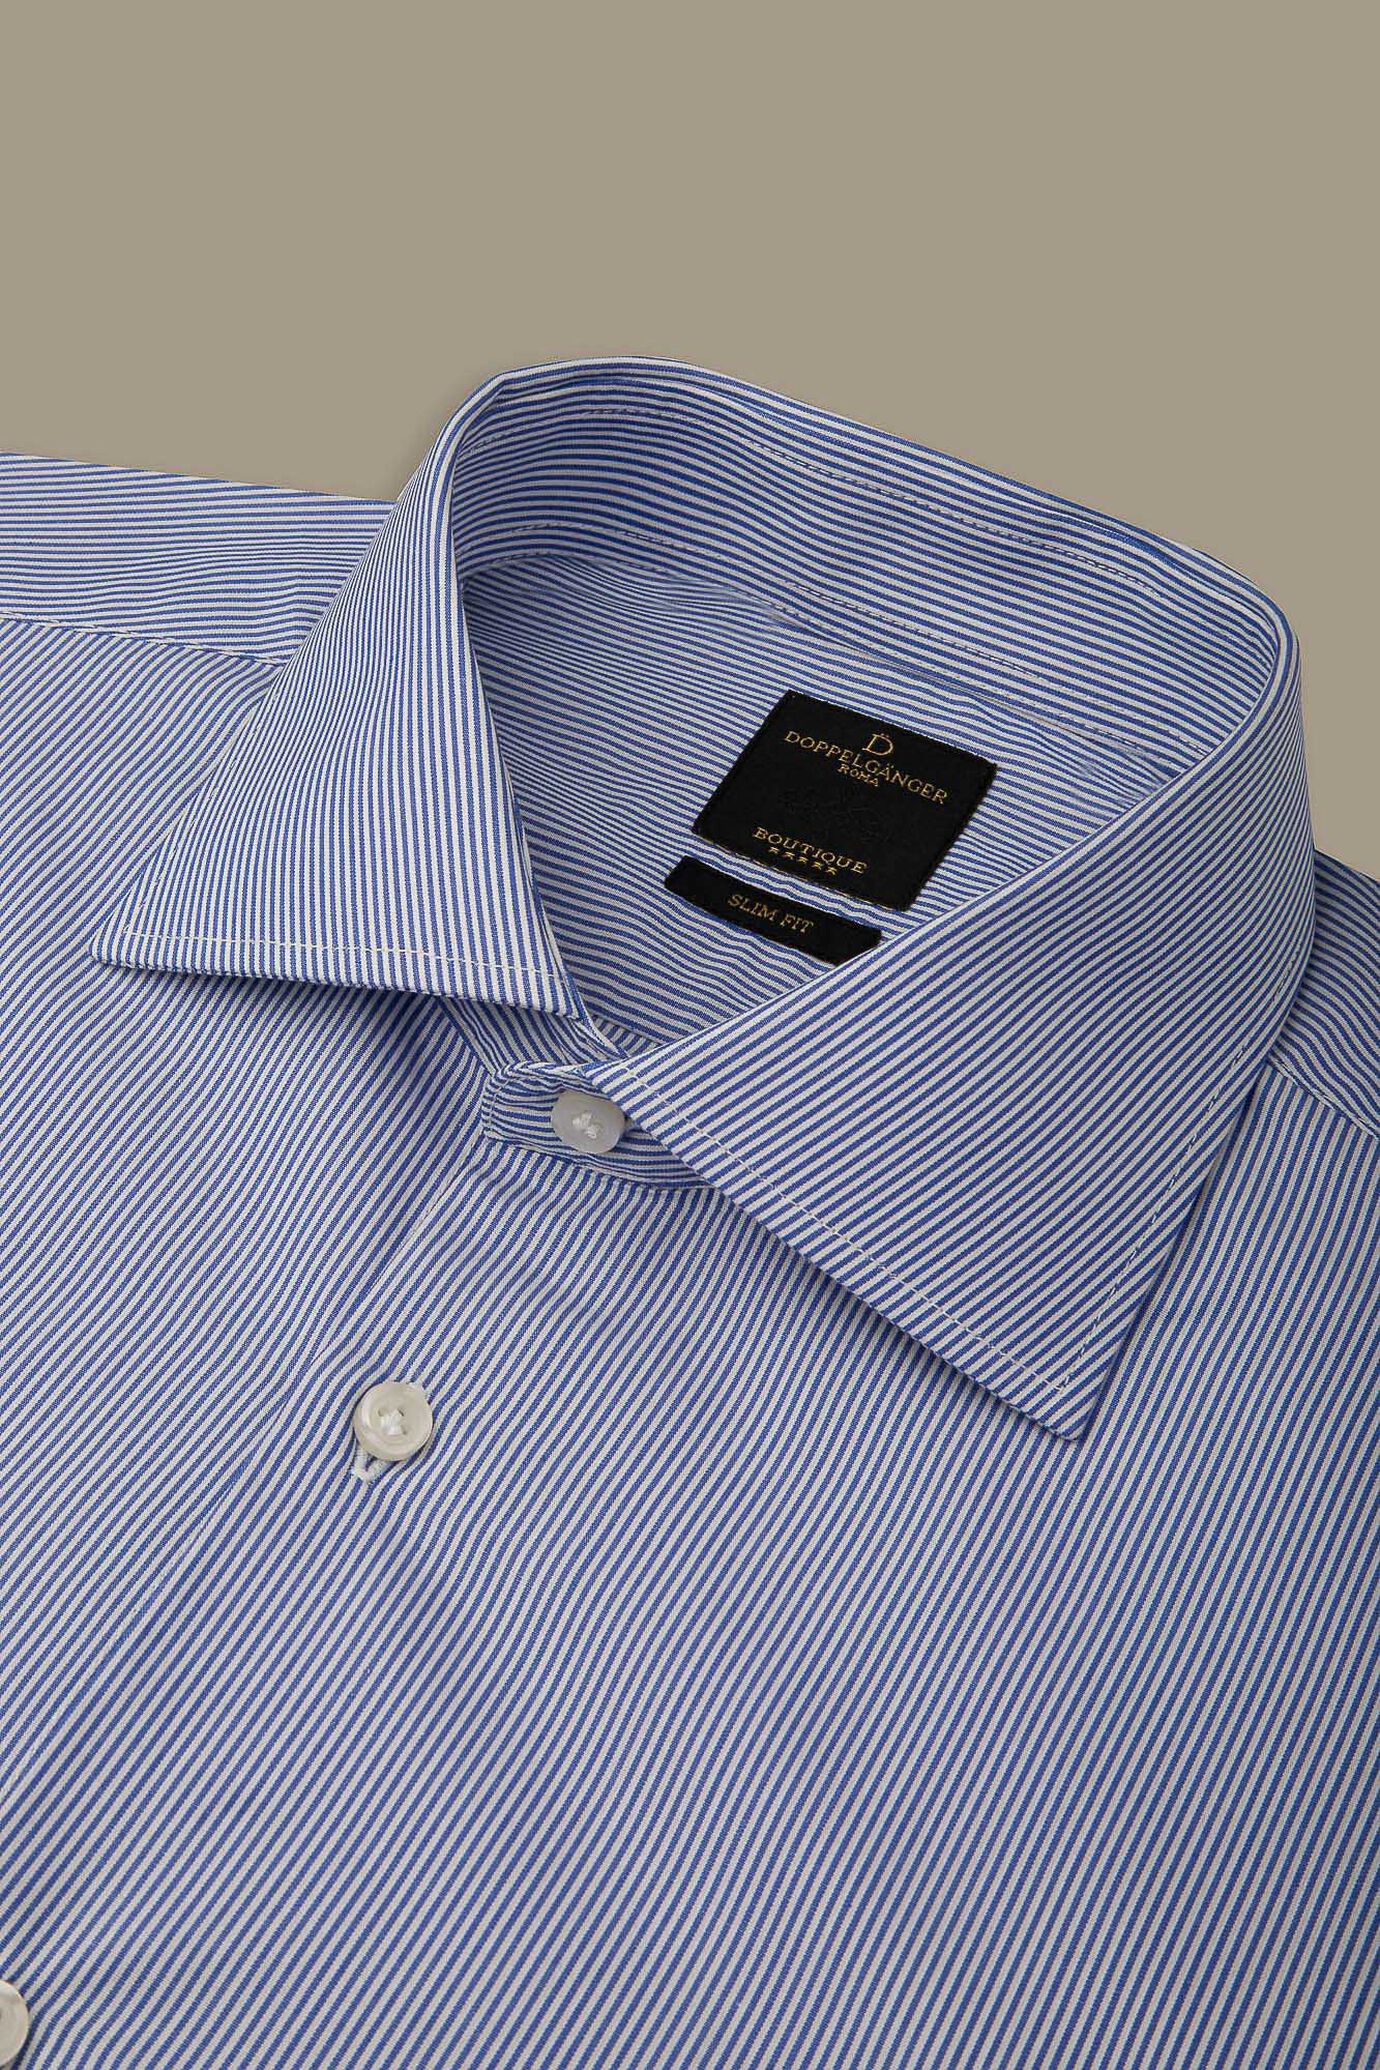 French collar classic shirt yarn dyed narrow stripes image number 1